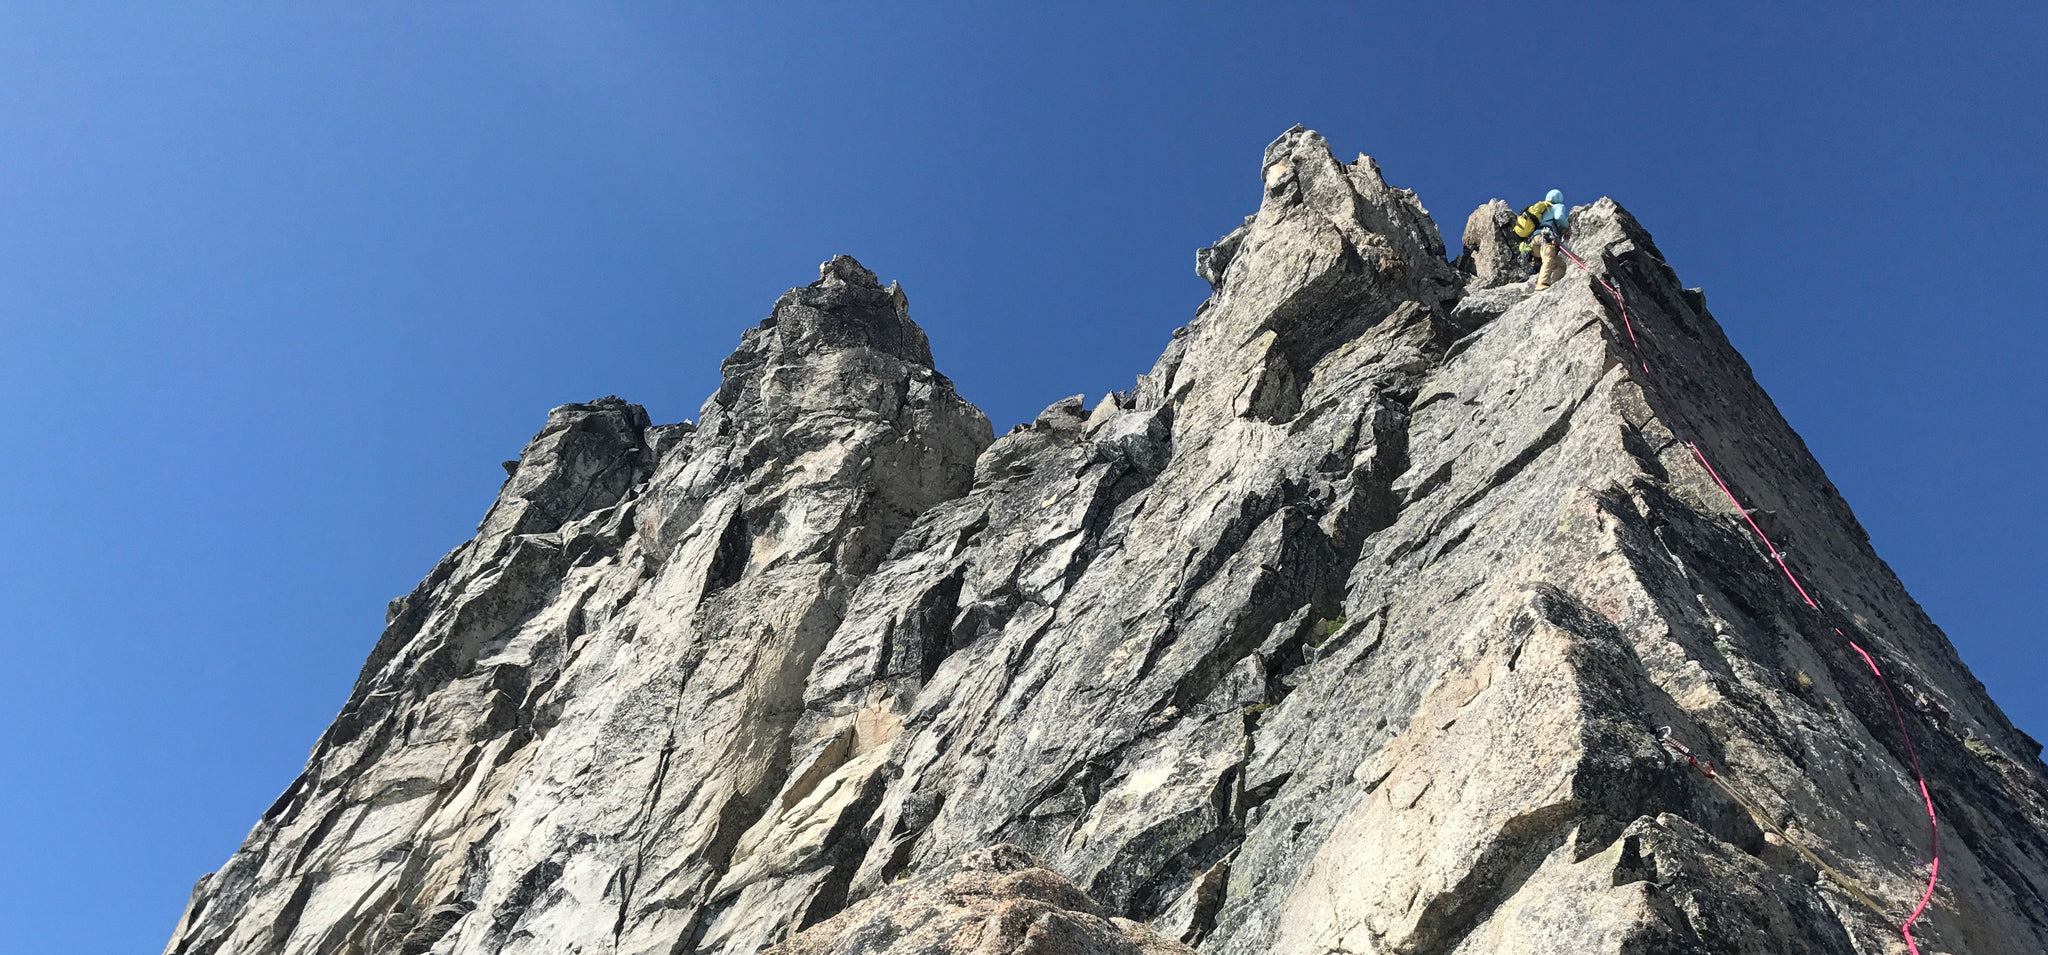 A climber high on Sharkfin Tower, one of the classic climbs in Boston Basin.